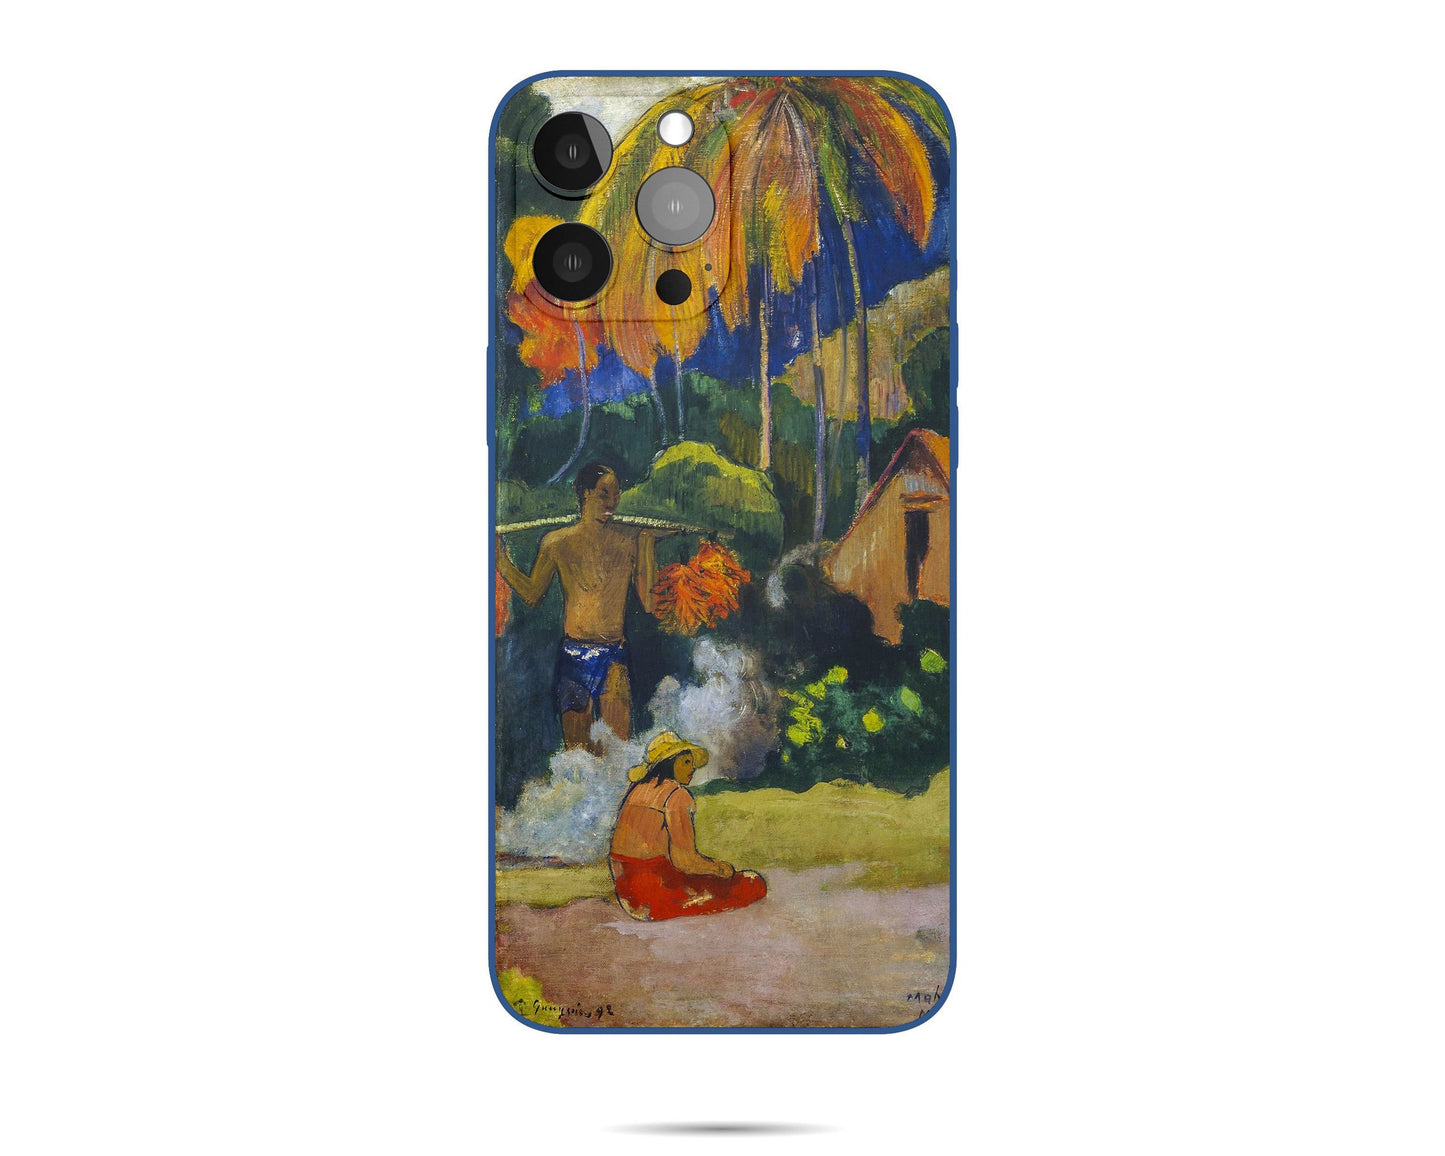 Iphone 14 Case Of Paul Gauguin Famous Painting, Iphone 12 Pro Case, Iphone 7 Plus Case, Designer Iphone 8 Plus Case, Iphone Protective Case